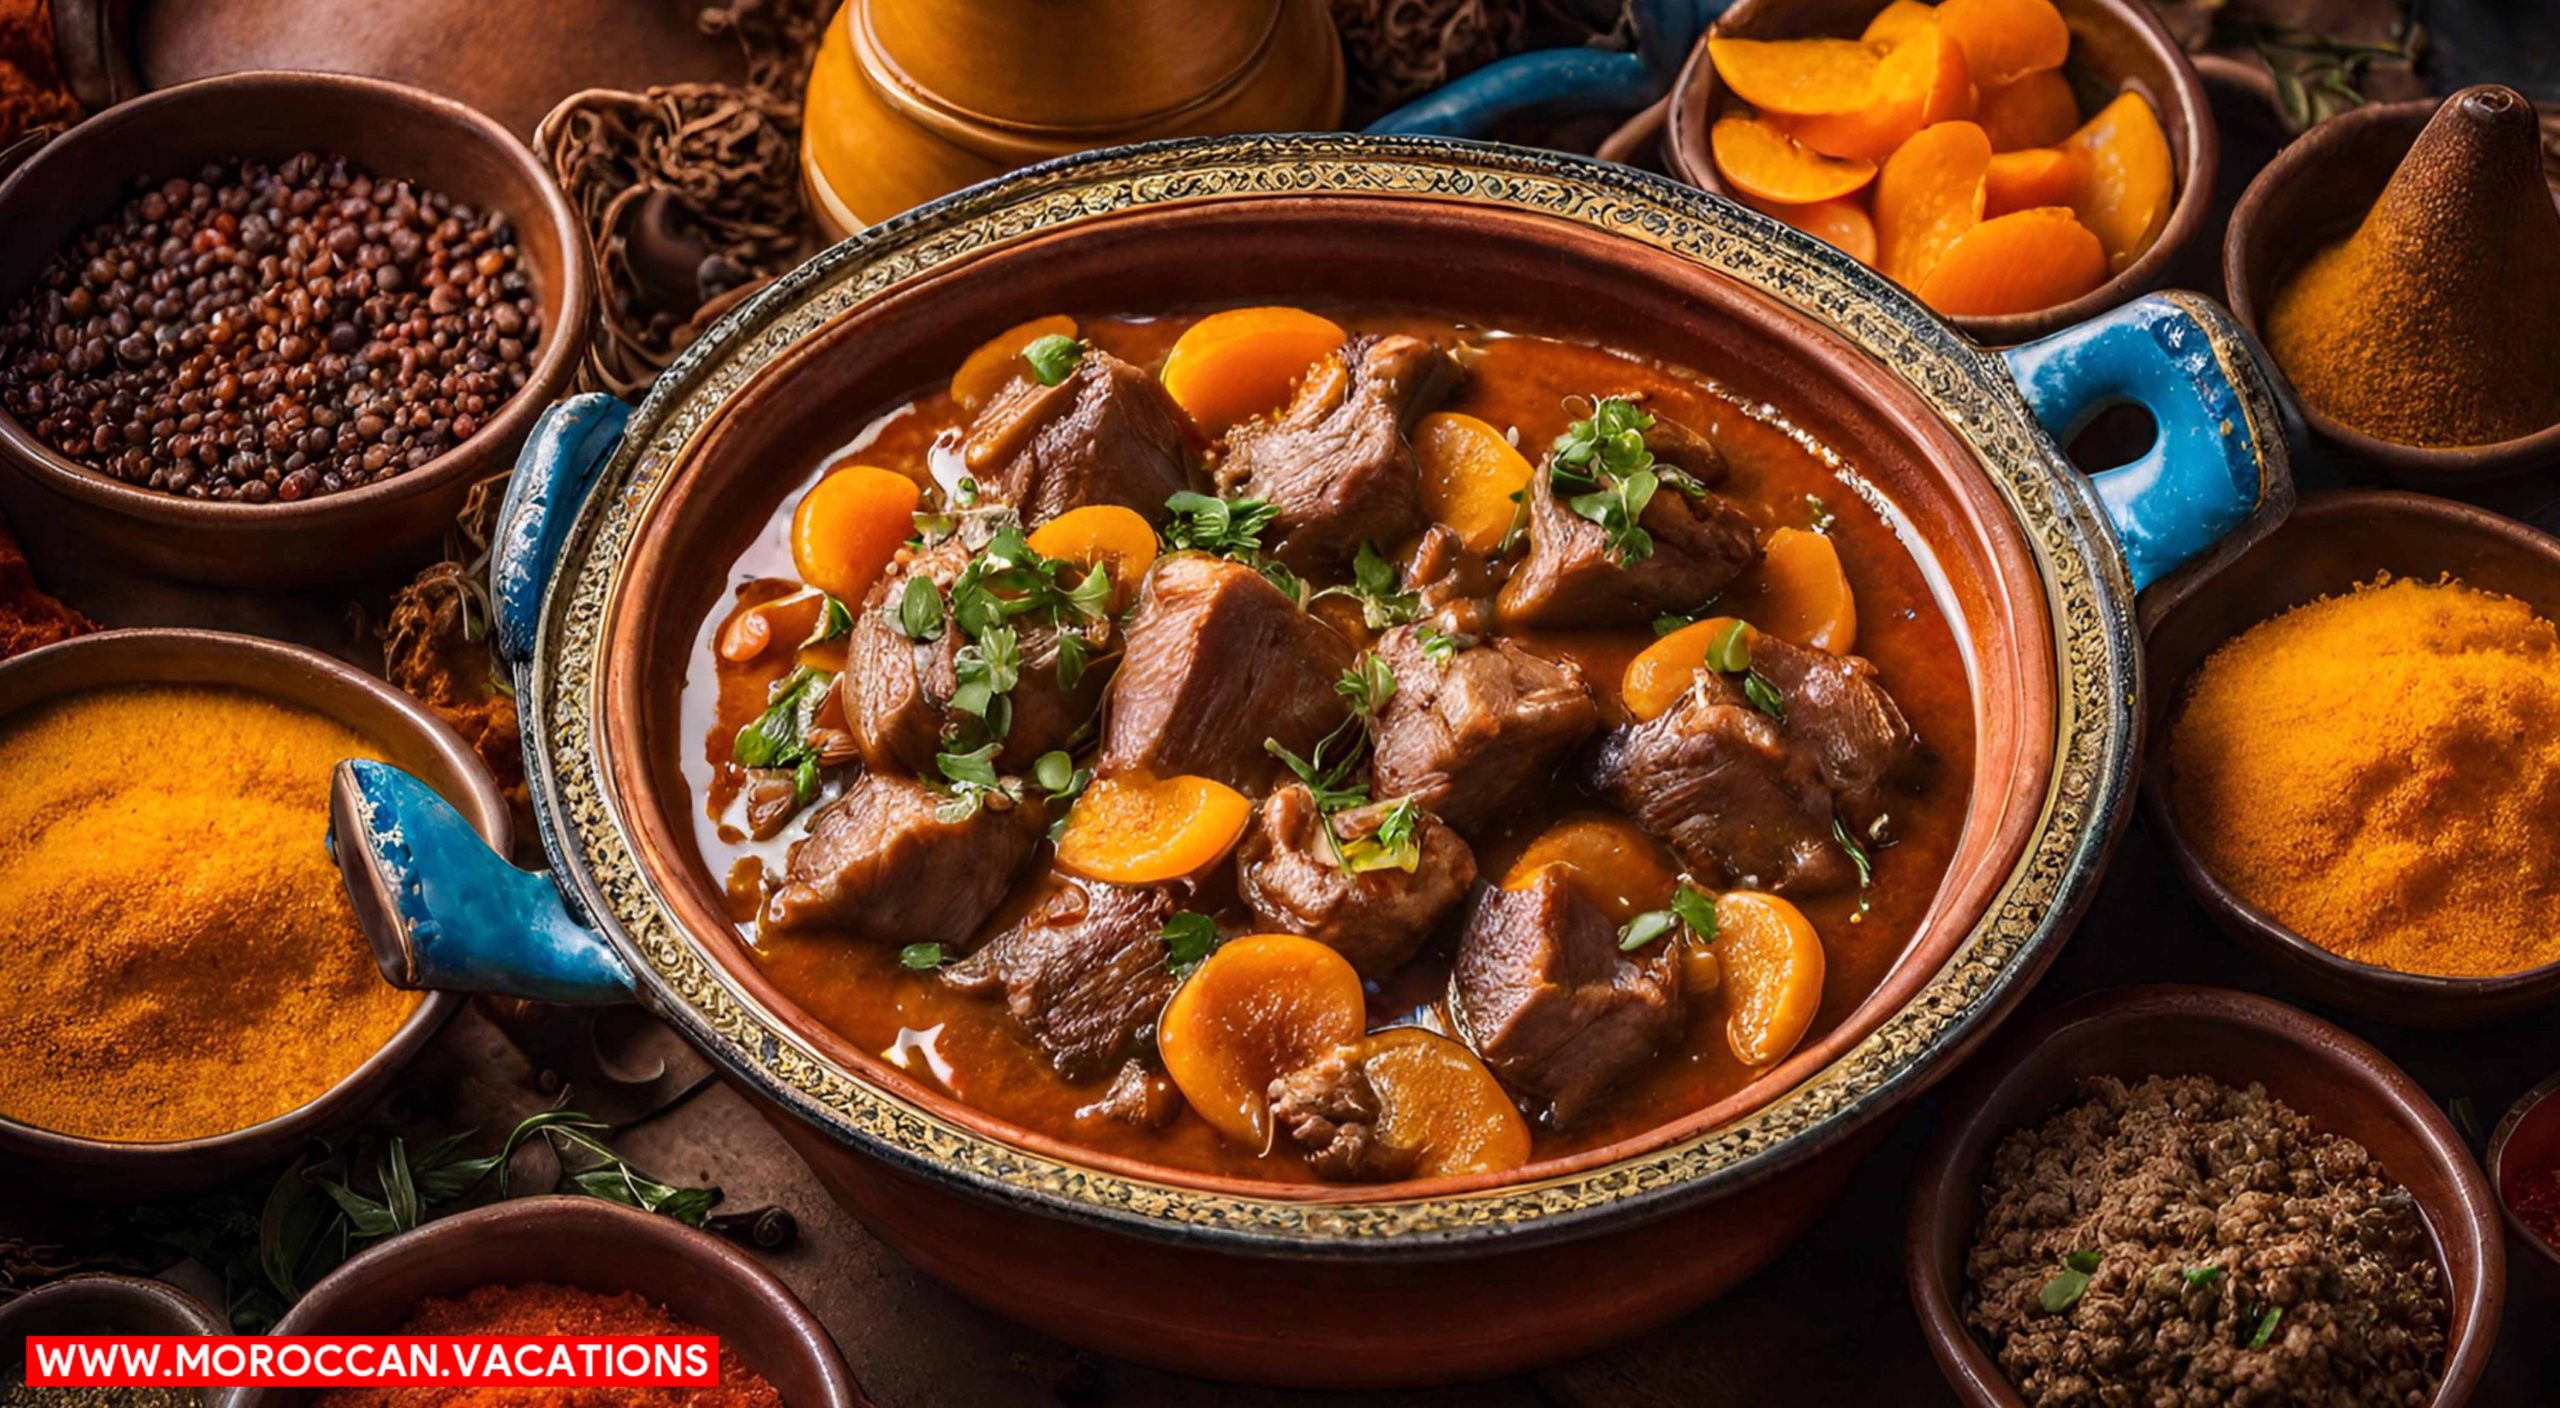 A colorful tagine dish, steaming with fragrant spices and filled with tender lamb.